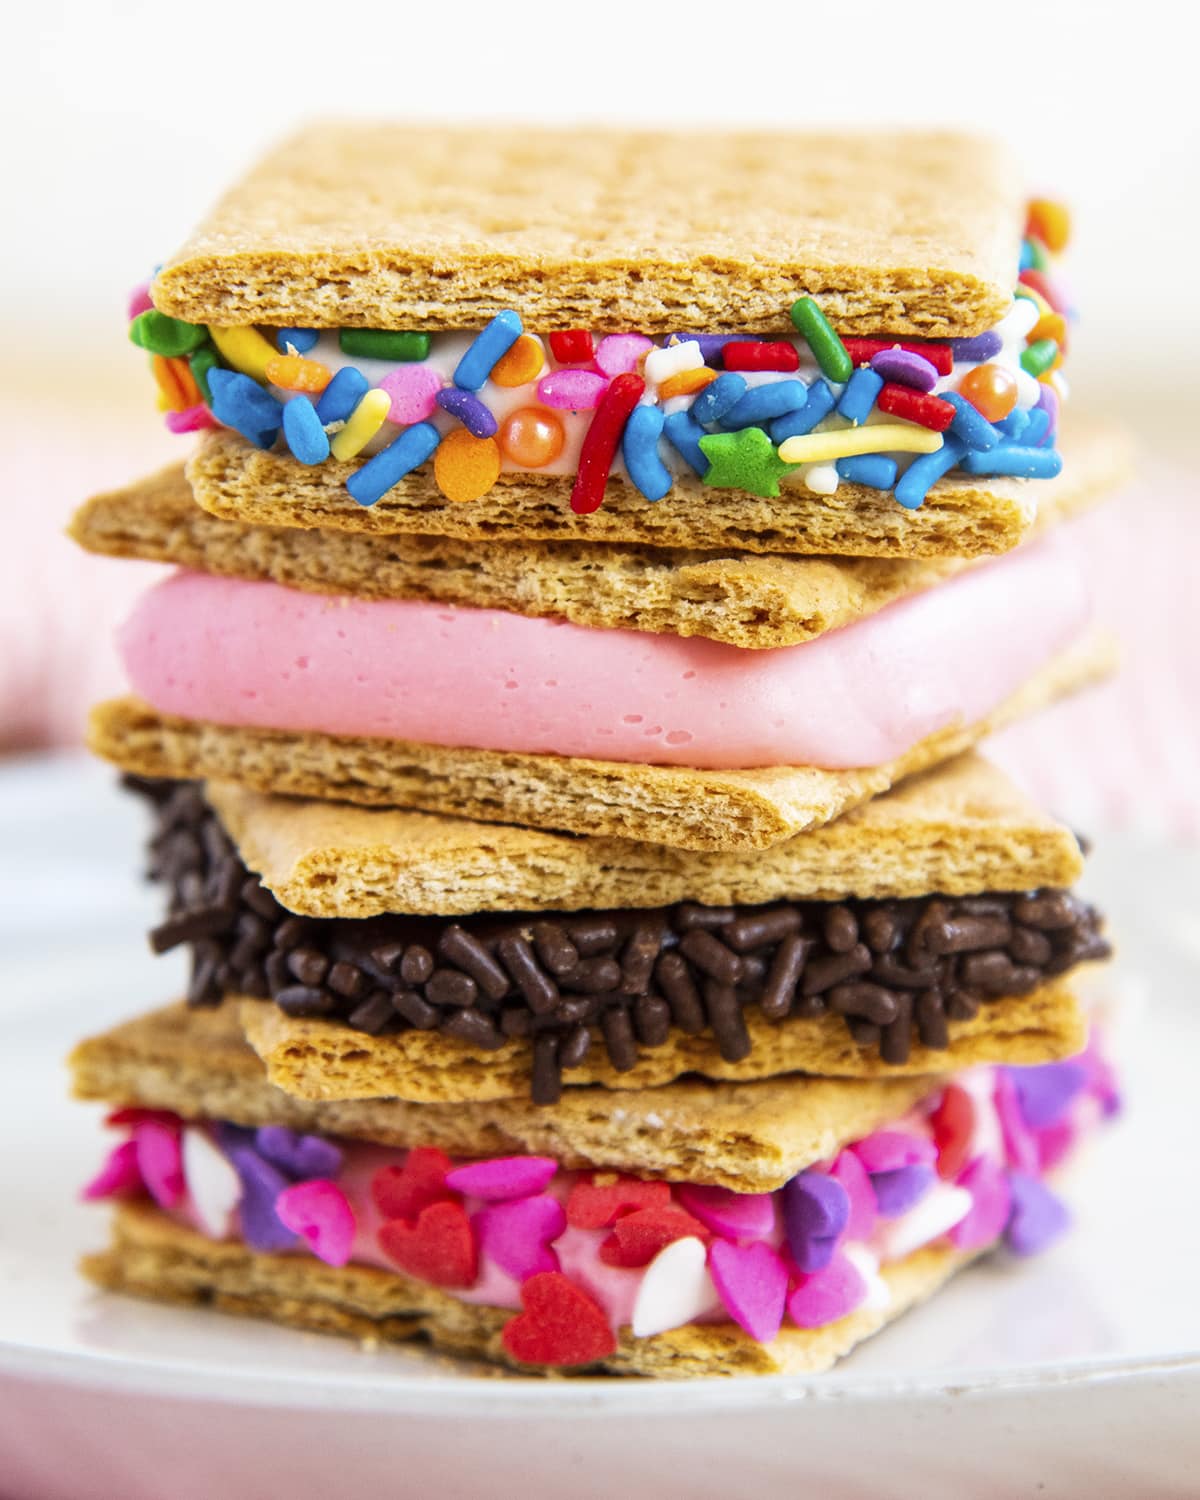 A stack of graham crackers full of frosting in the middle. There are 4 in the stack, with sprinkles on the outsides of three of them.